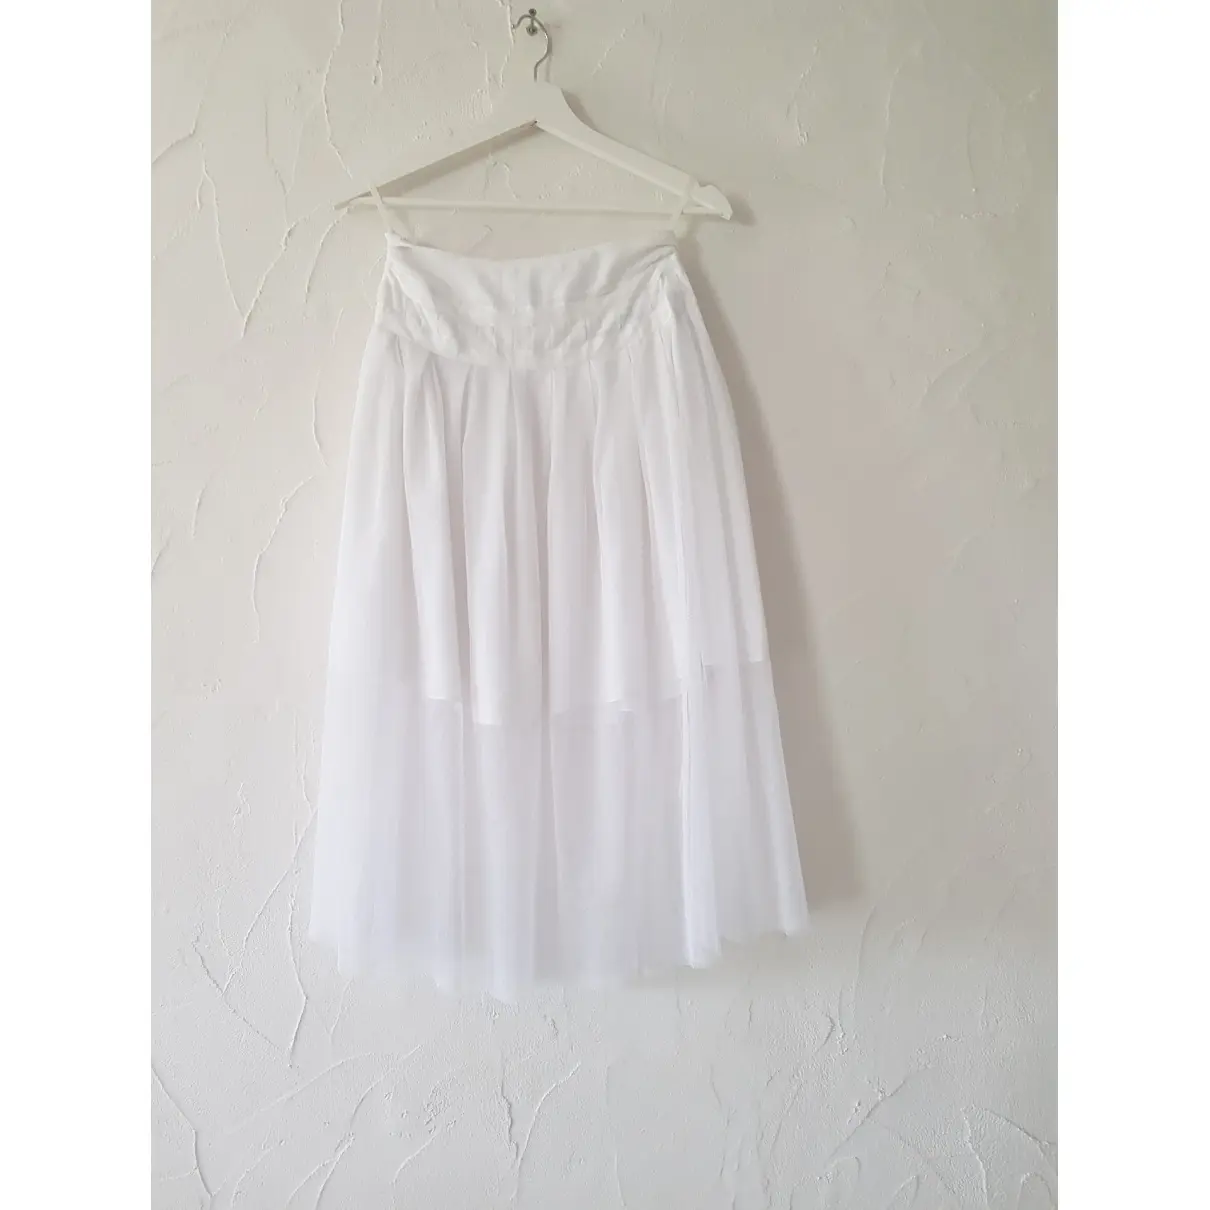 Repetto Mid-length skirt for sale